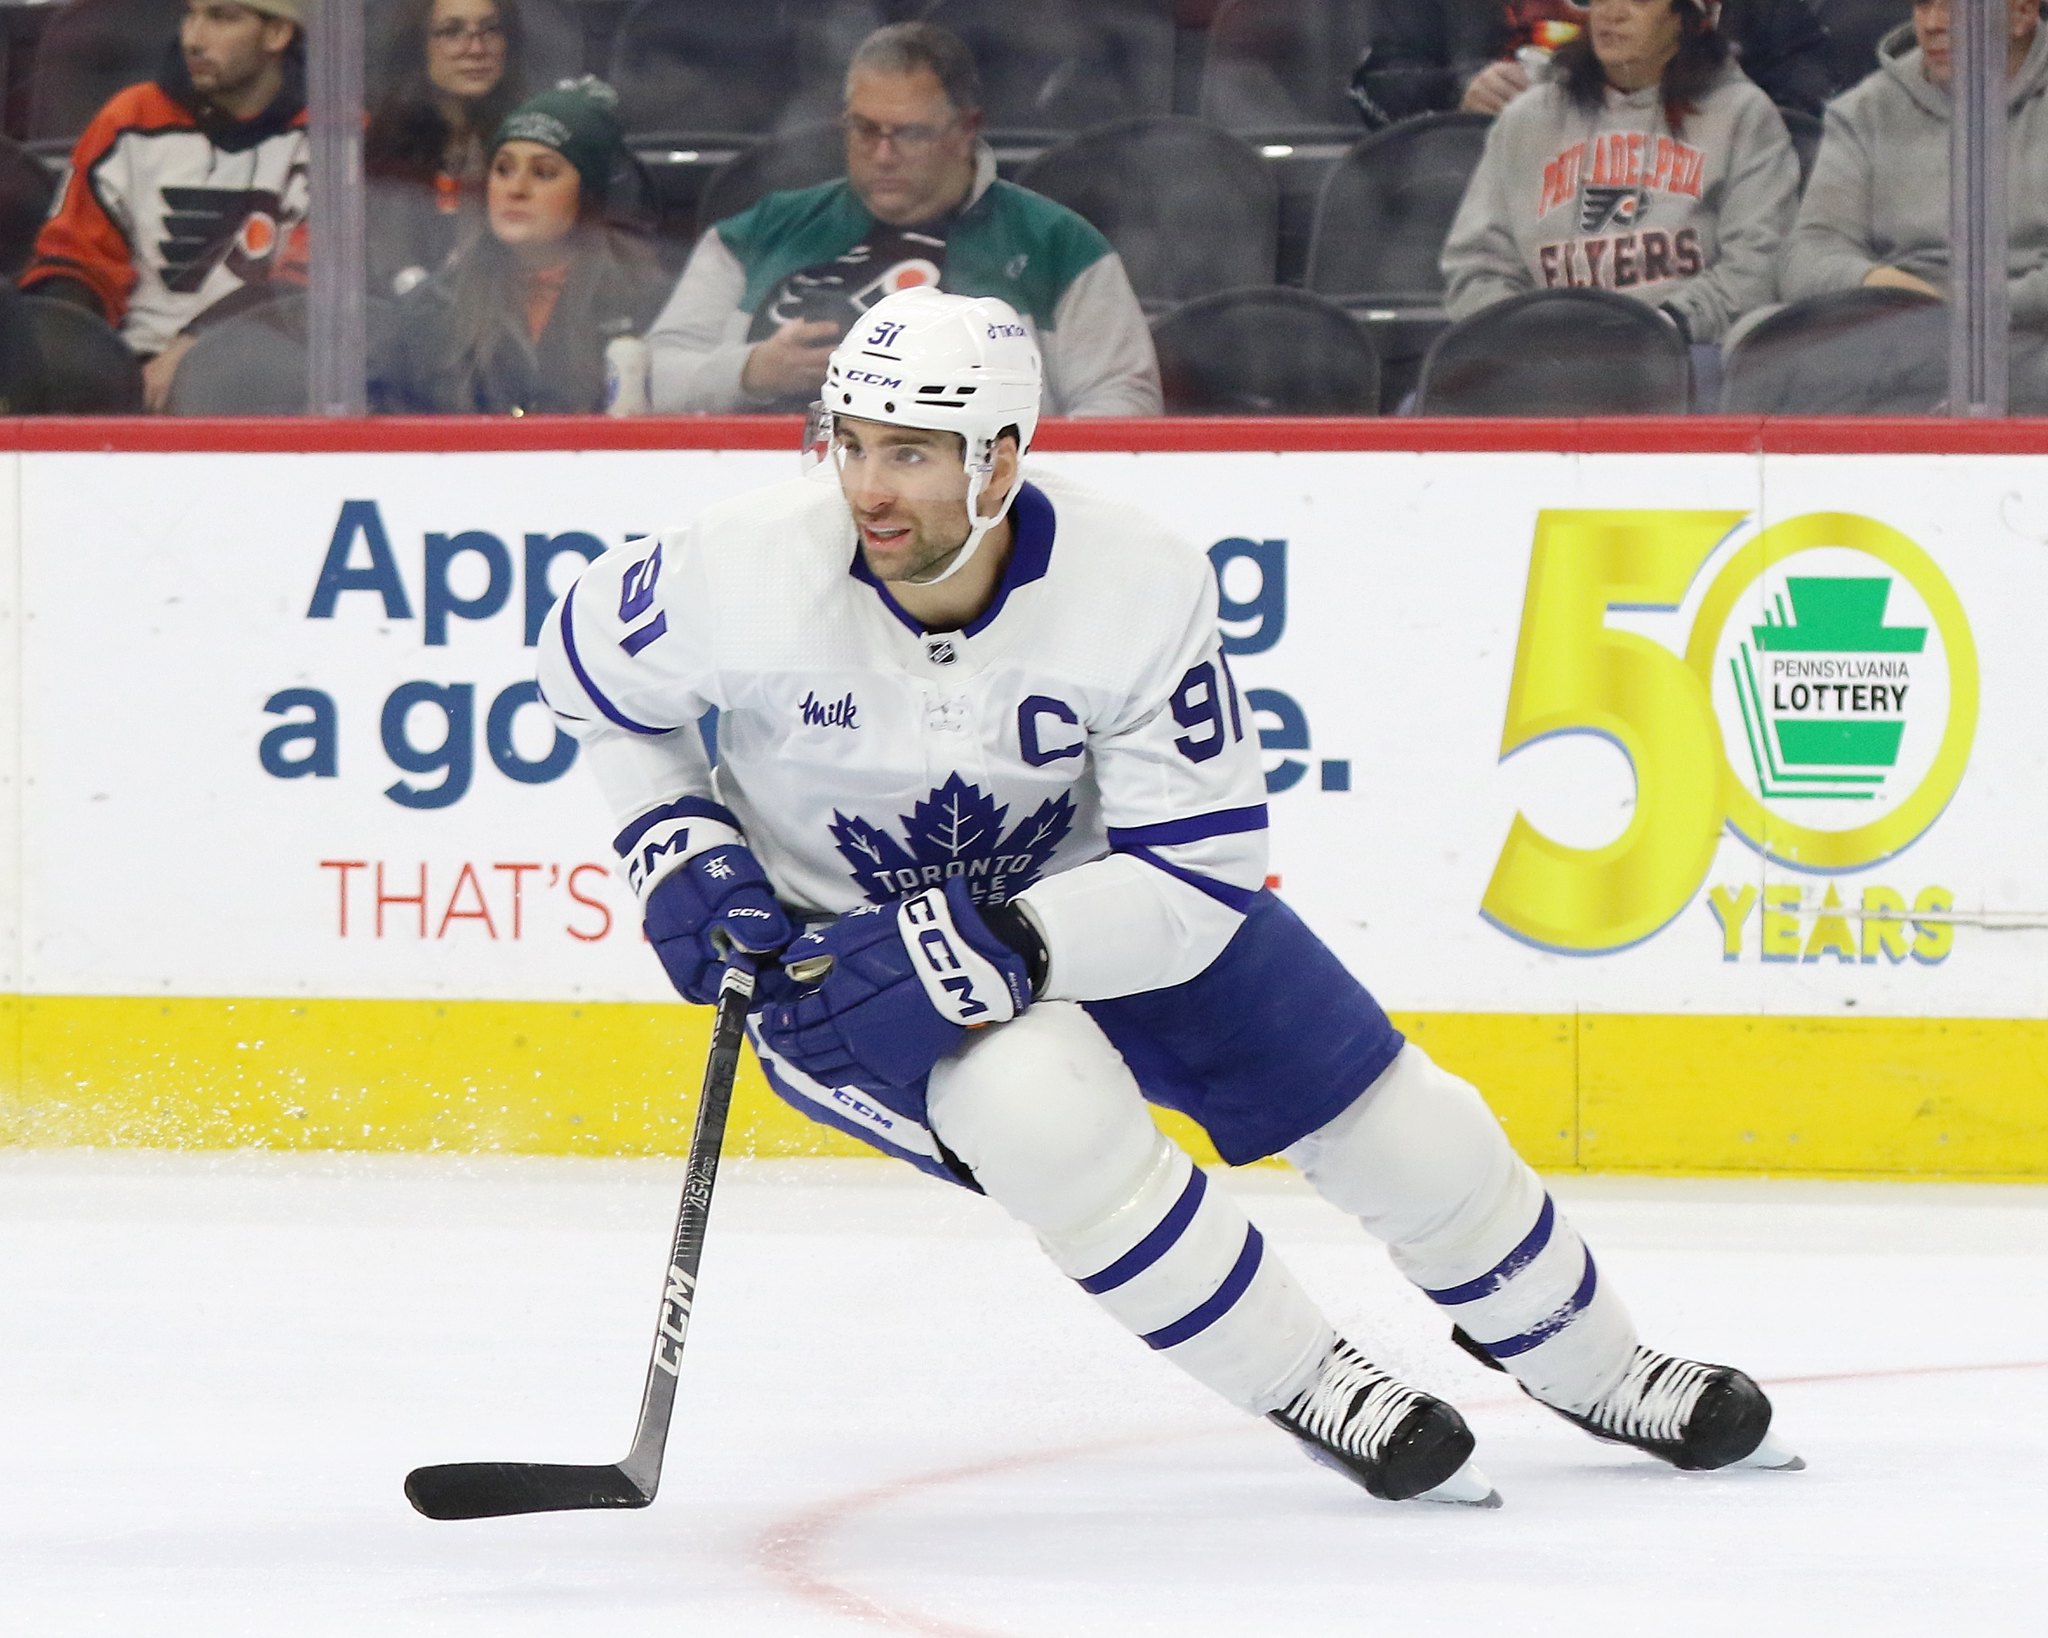 Top 10 World Junior Performances by Current Toronto Maple Leafs - Page 10